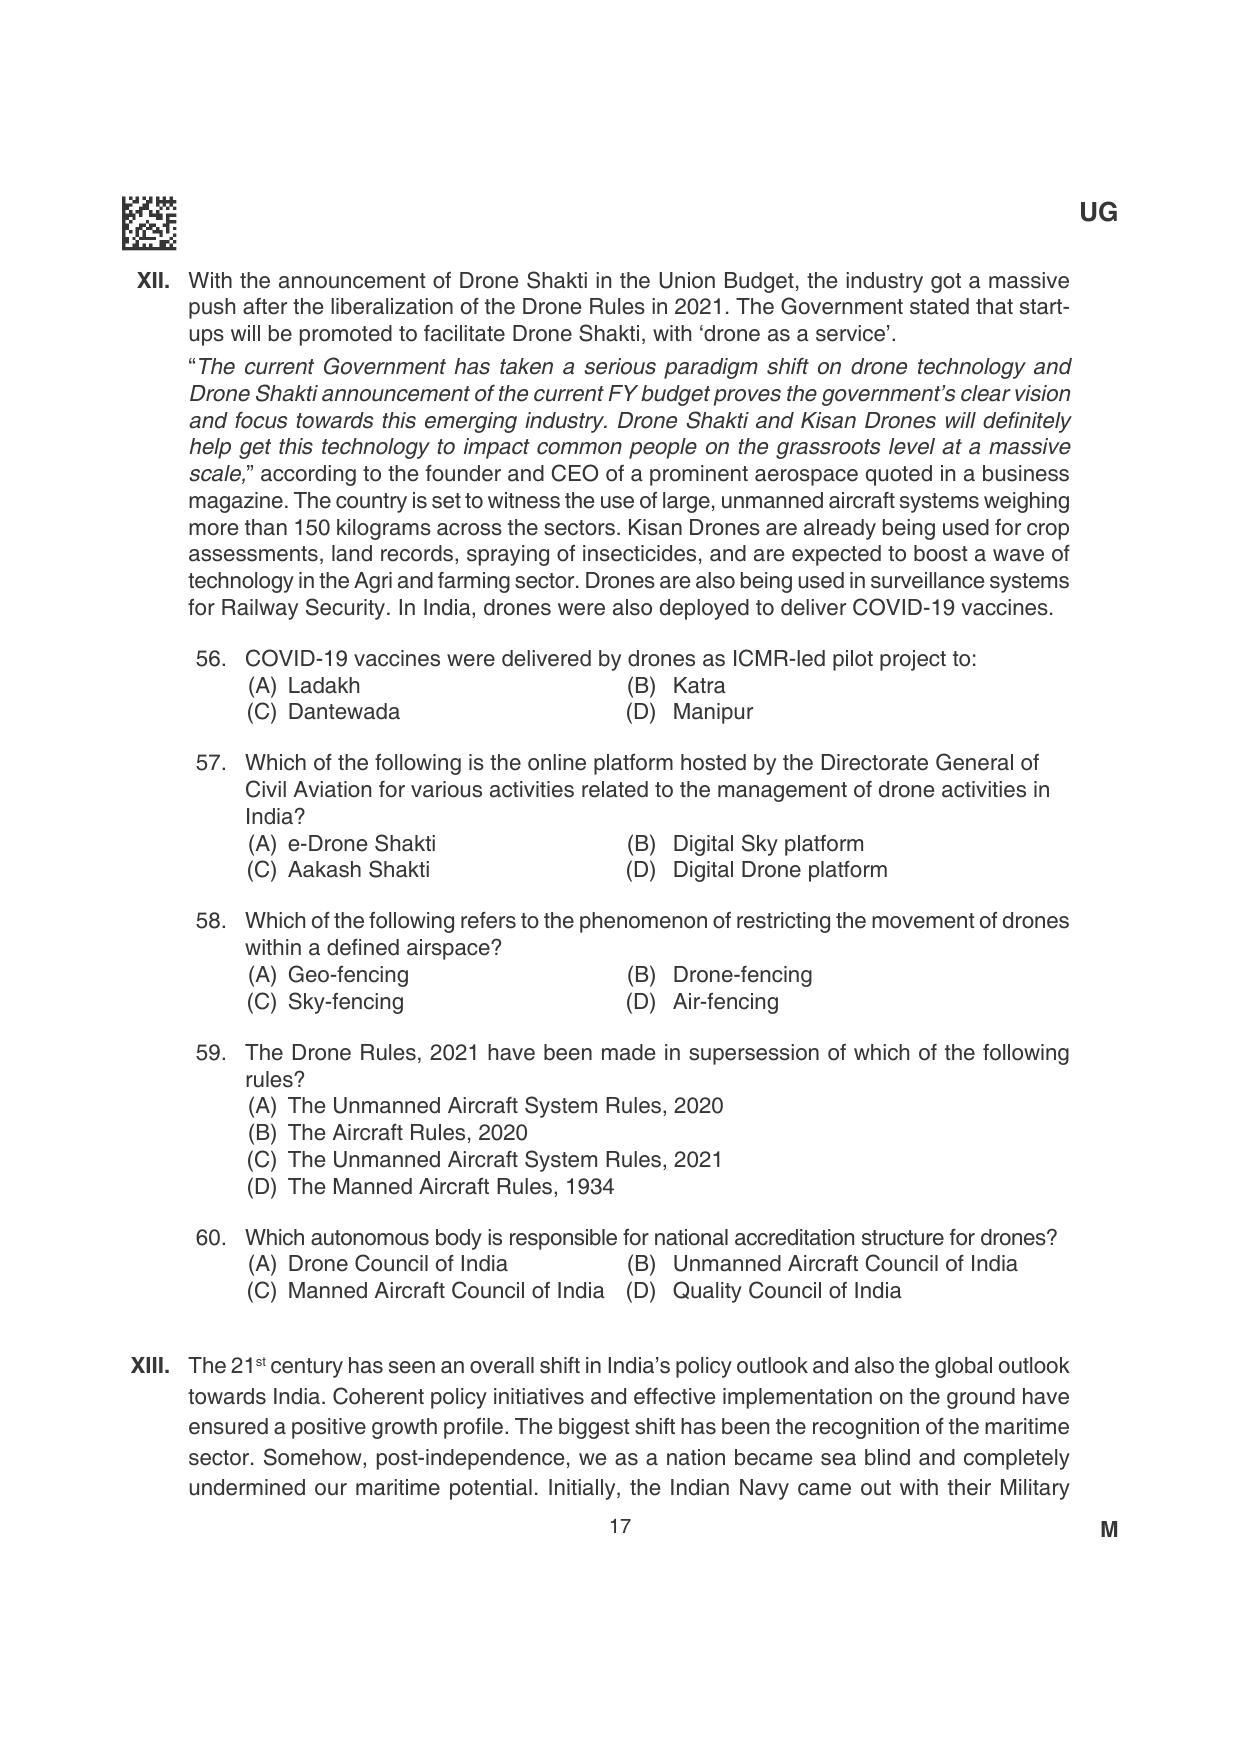 CLAT 2022 UG Question Papers - Page 17